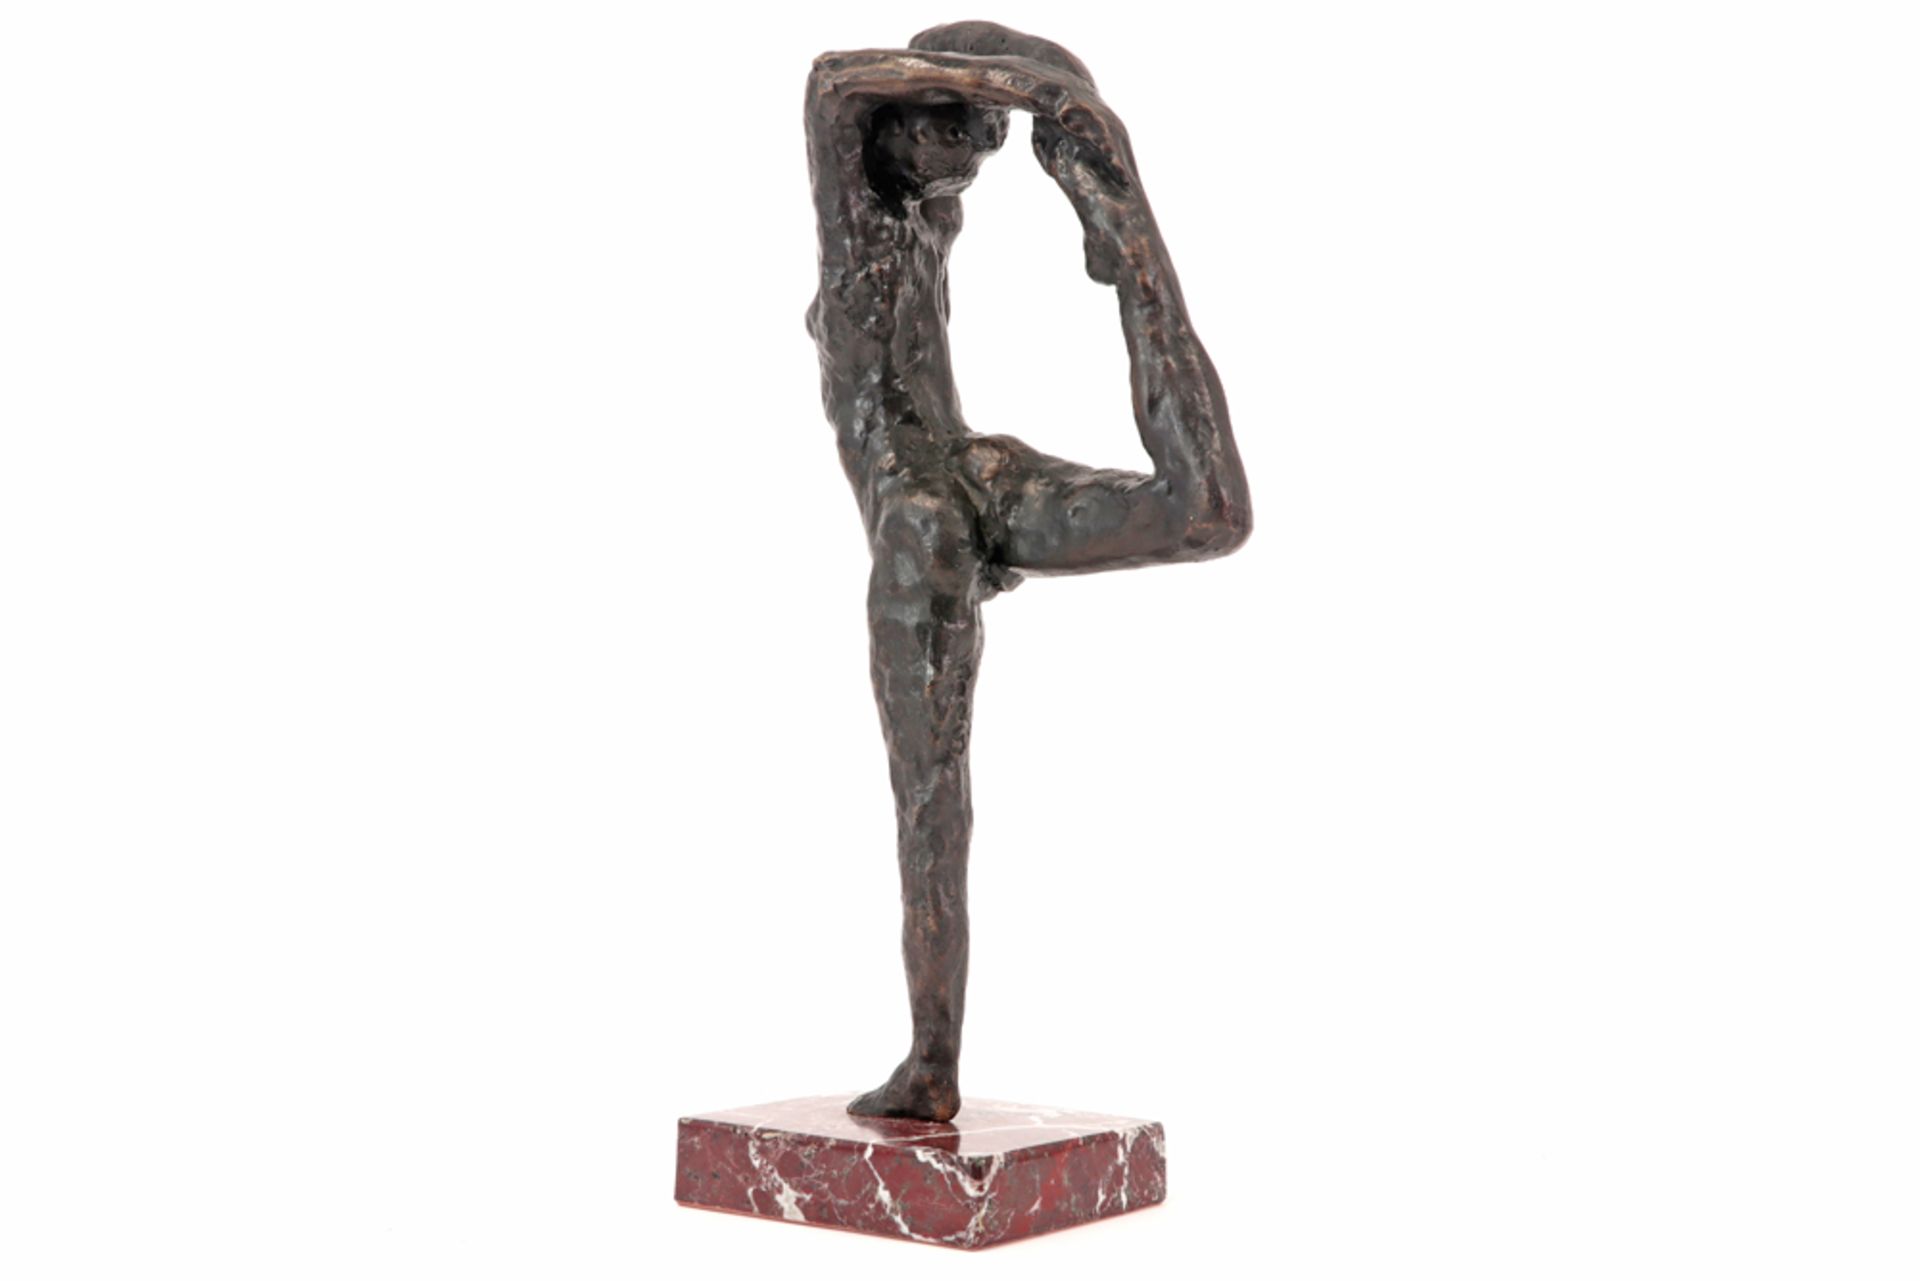 sculpture in bronze after Auguste Rodin on its marble base - with facsimile signature and foundry - Image 4 of 5